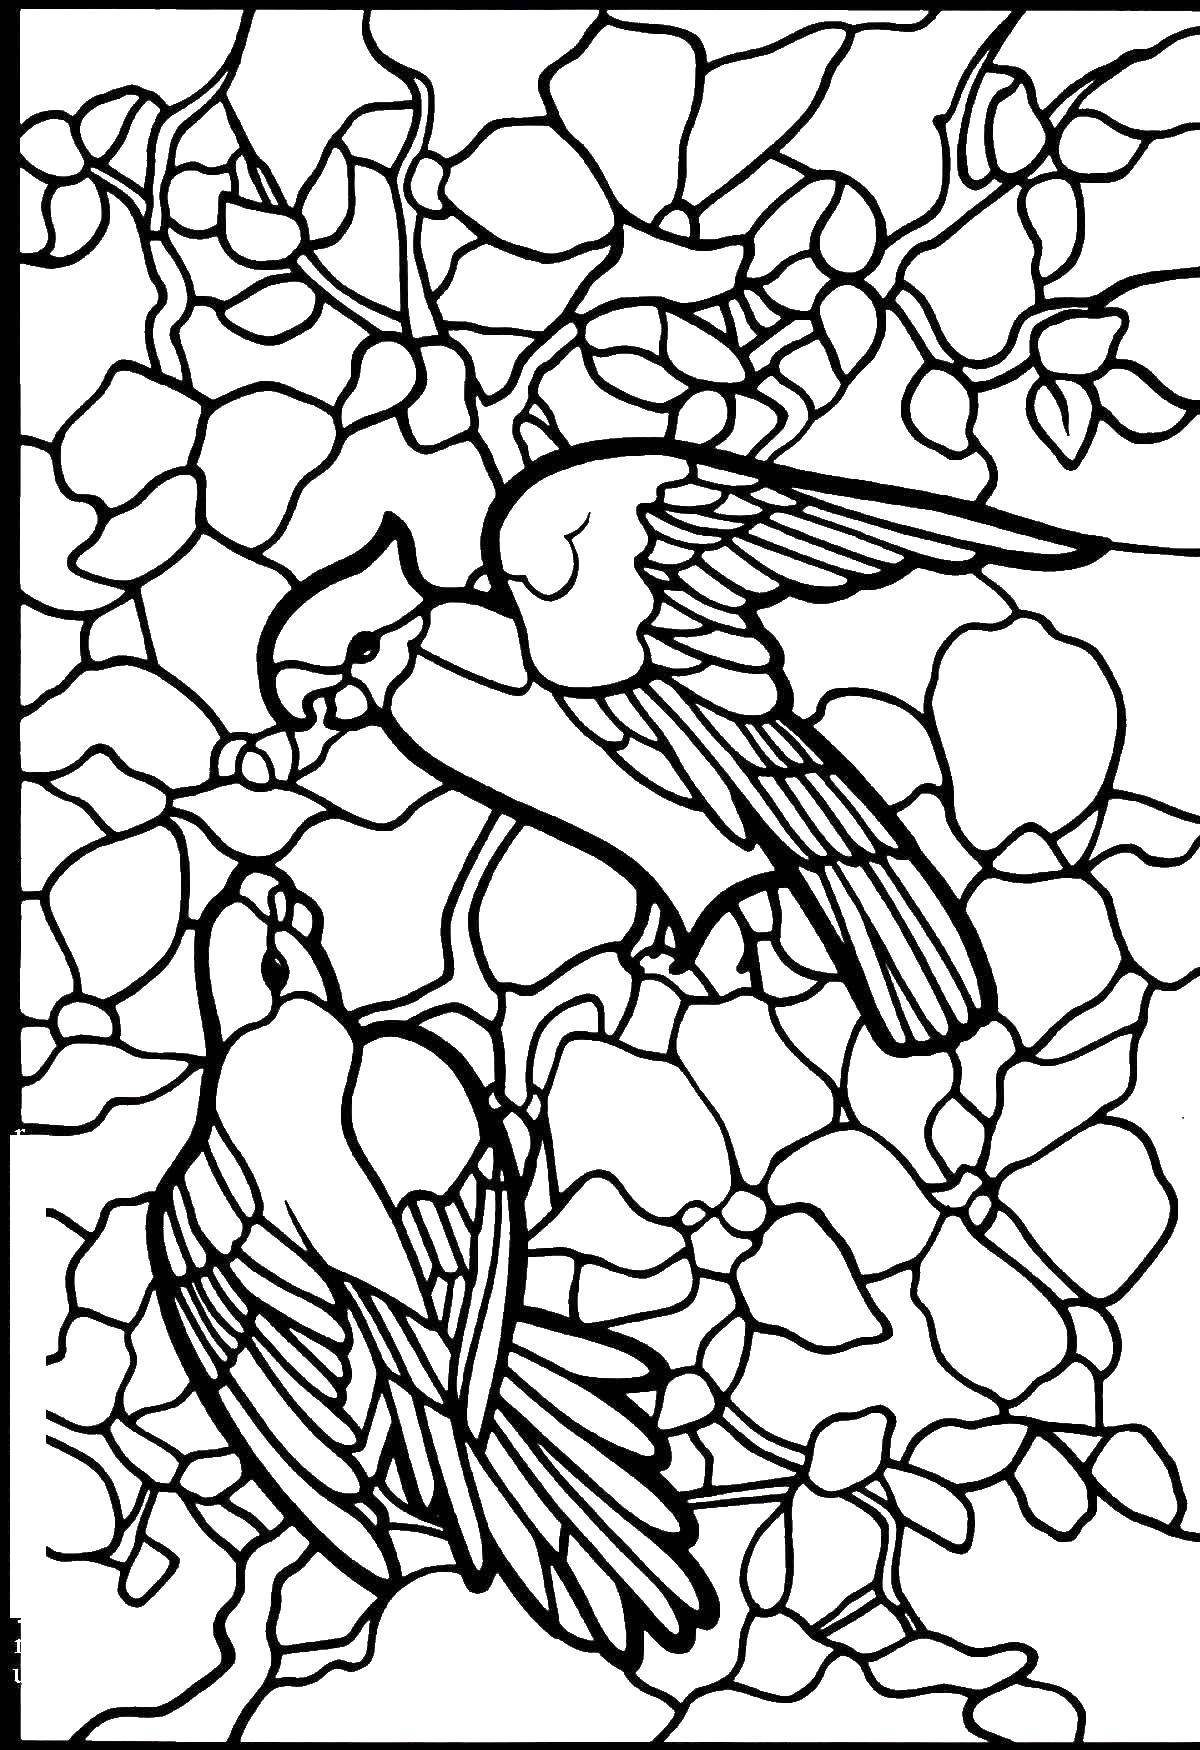 Stained glass bird